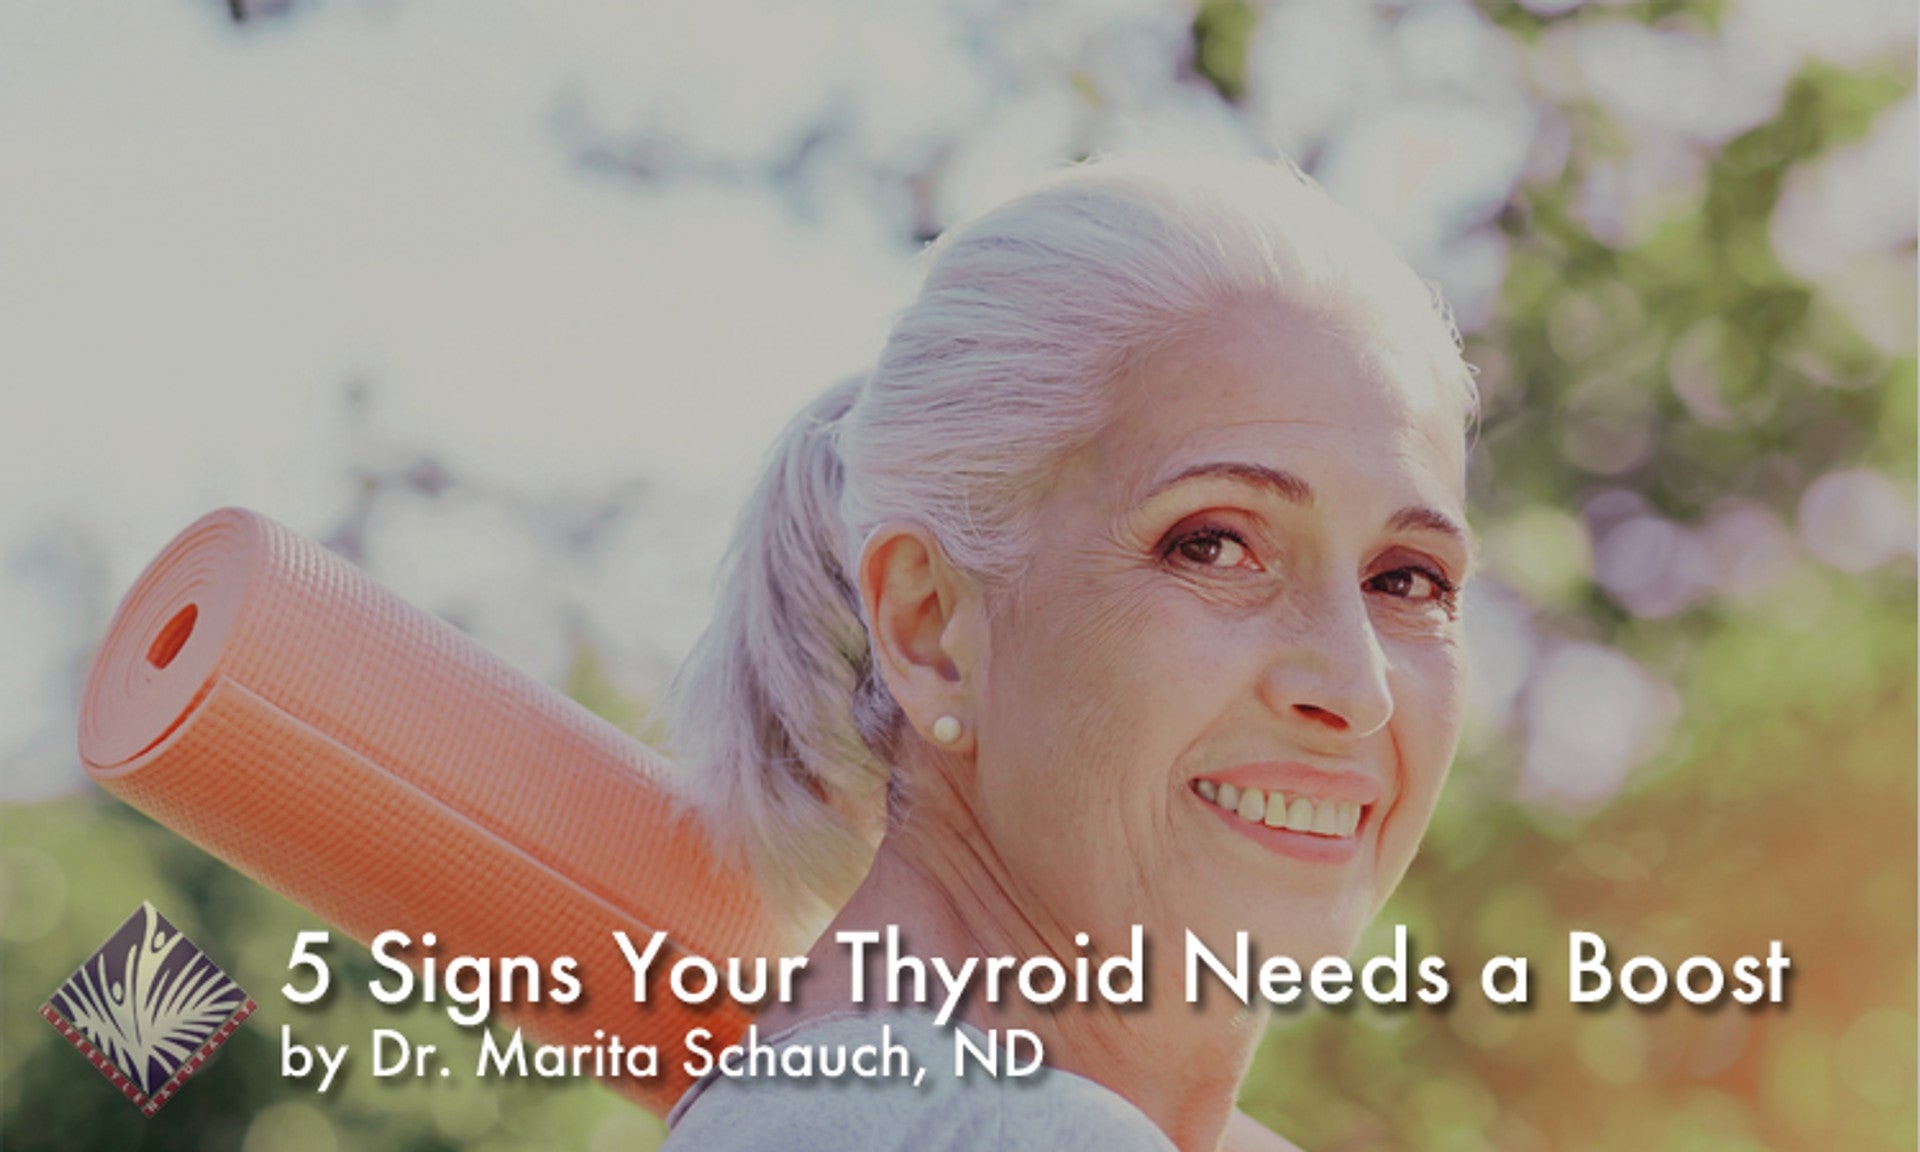 5 Signs Your Thyroid Needs a Boost